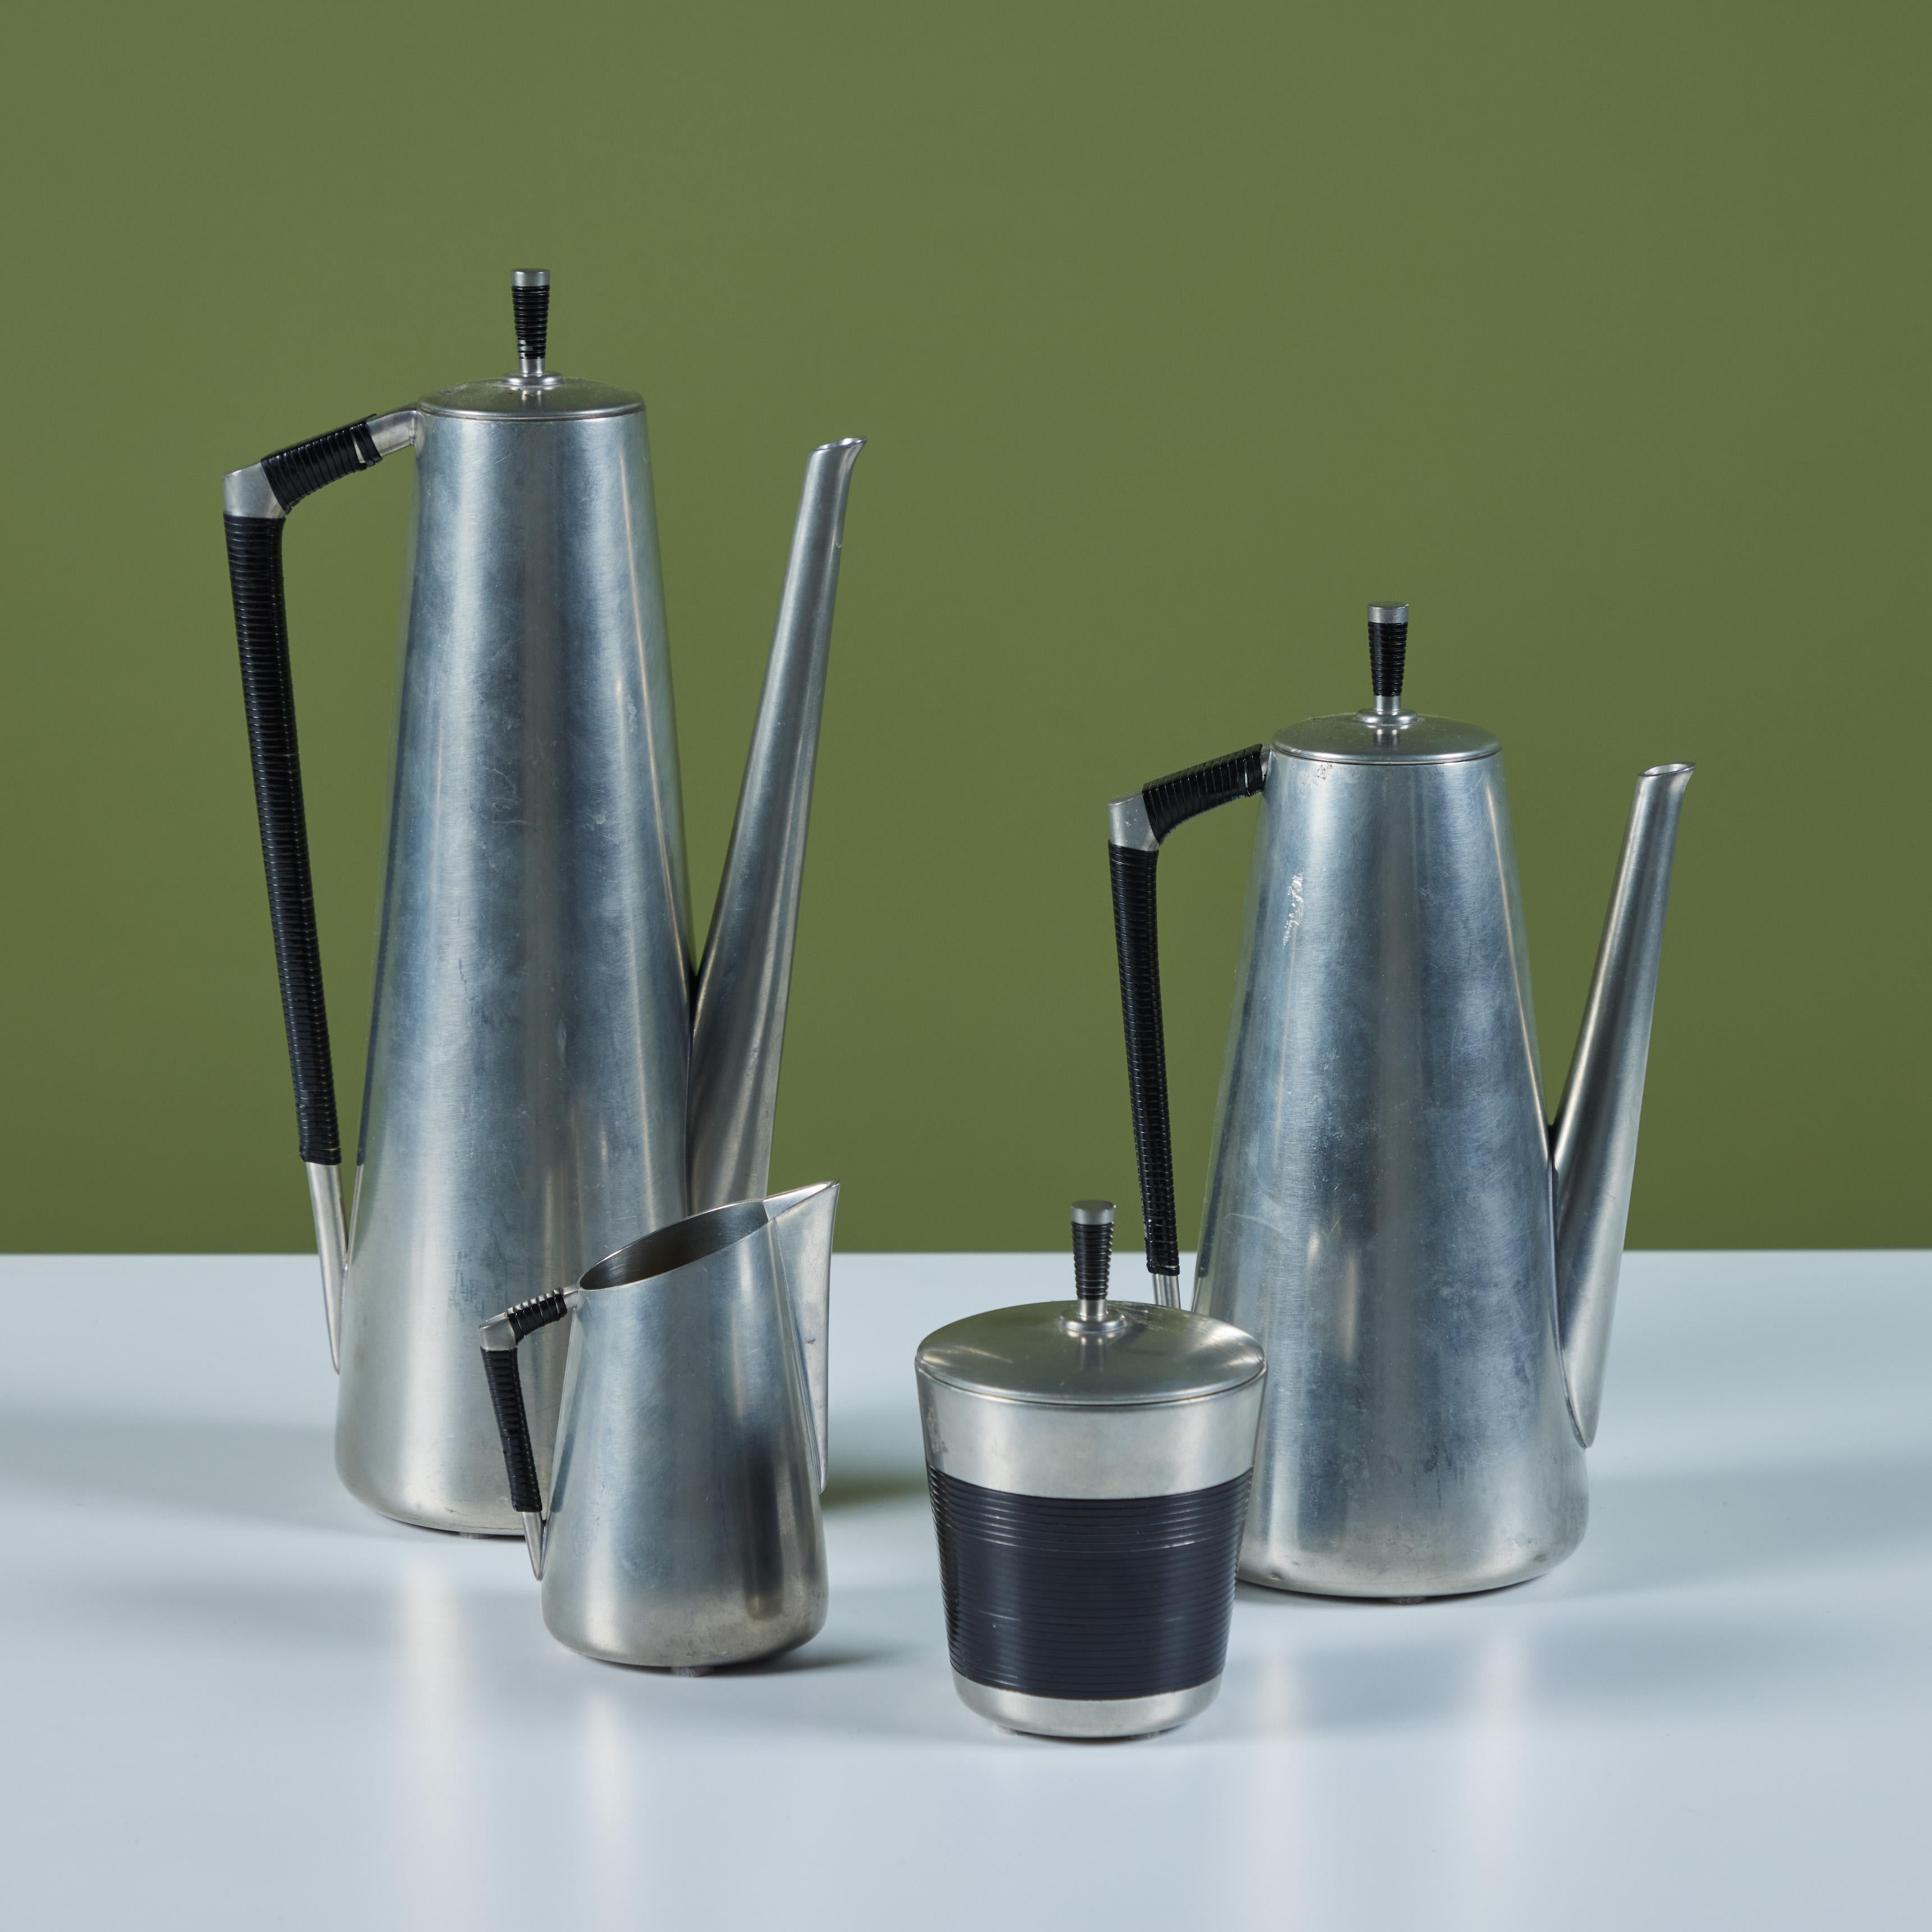 A Royal Holland four-piece service set in pewter with black vinyl accents, by J.N. Daalderop & Sons. This Royal Netherlands Metalworks set consists of two lidded pots used for coffee or tea, one creamer and one lidded sugar vessel.

Dimensions
Large